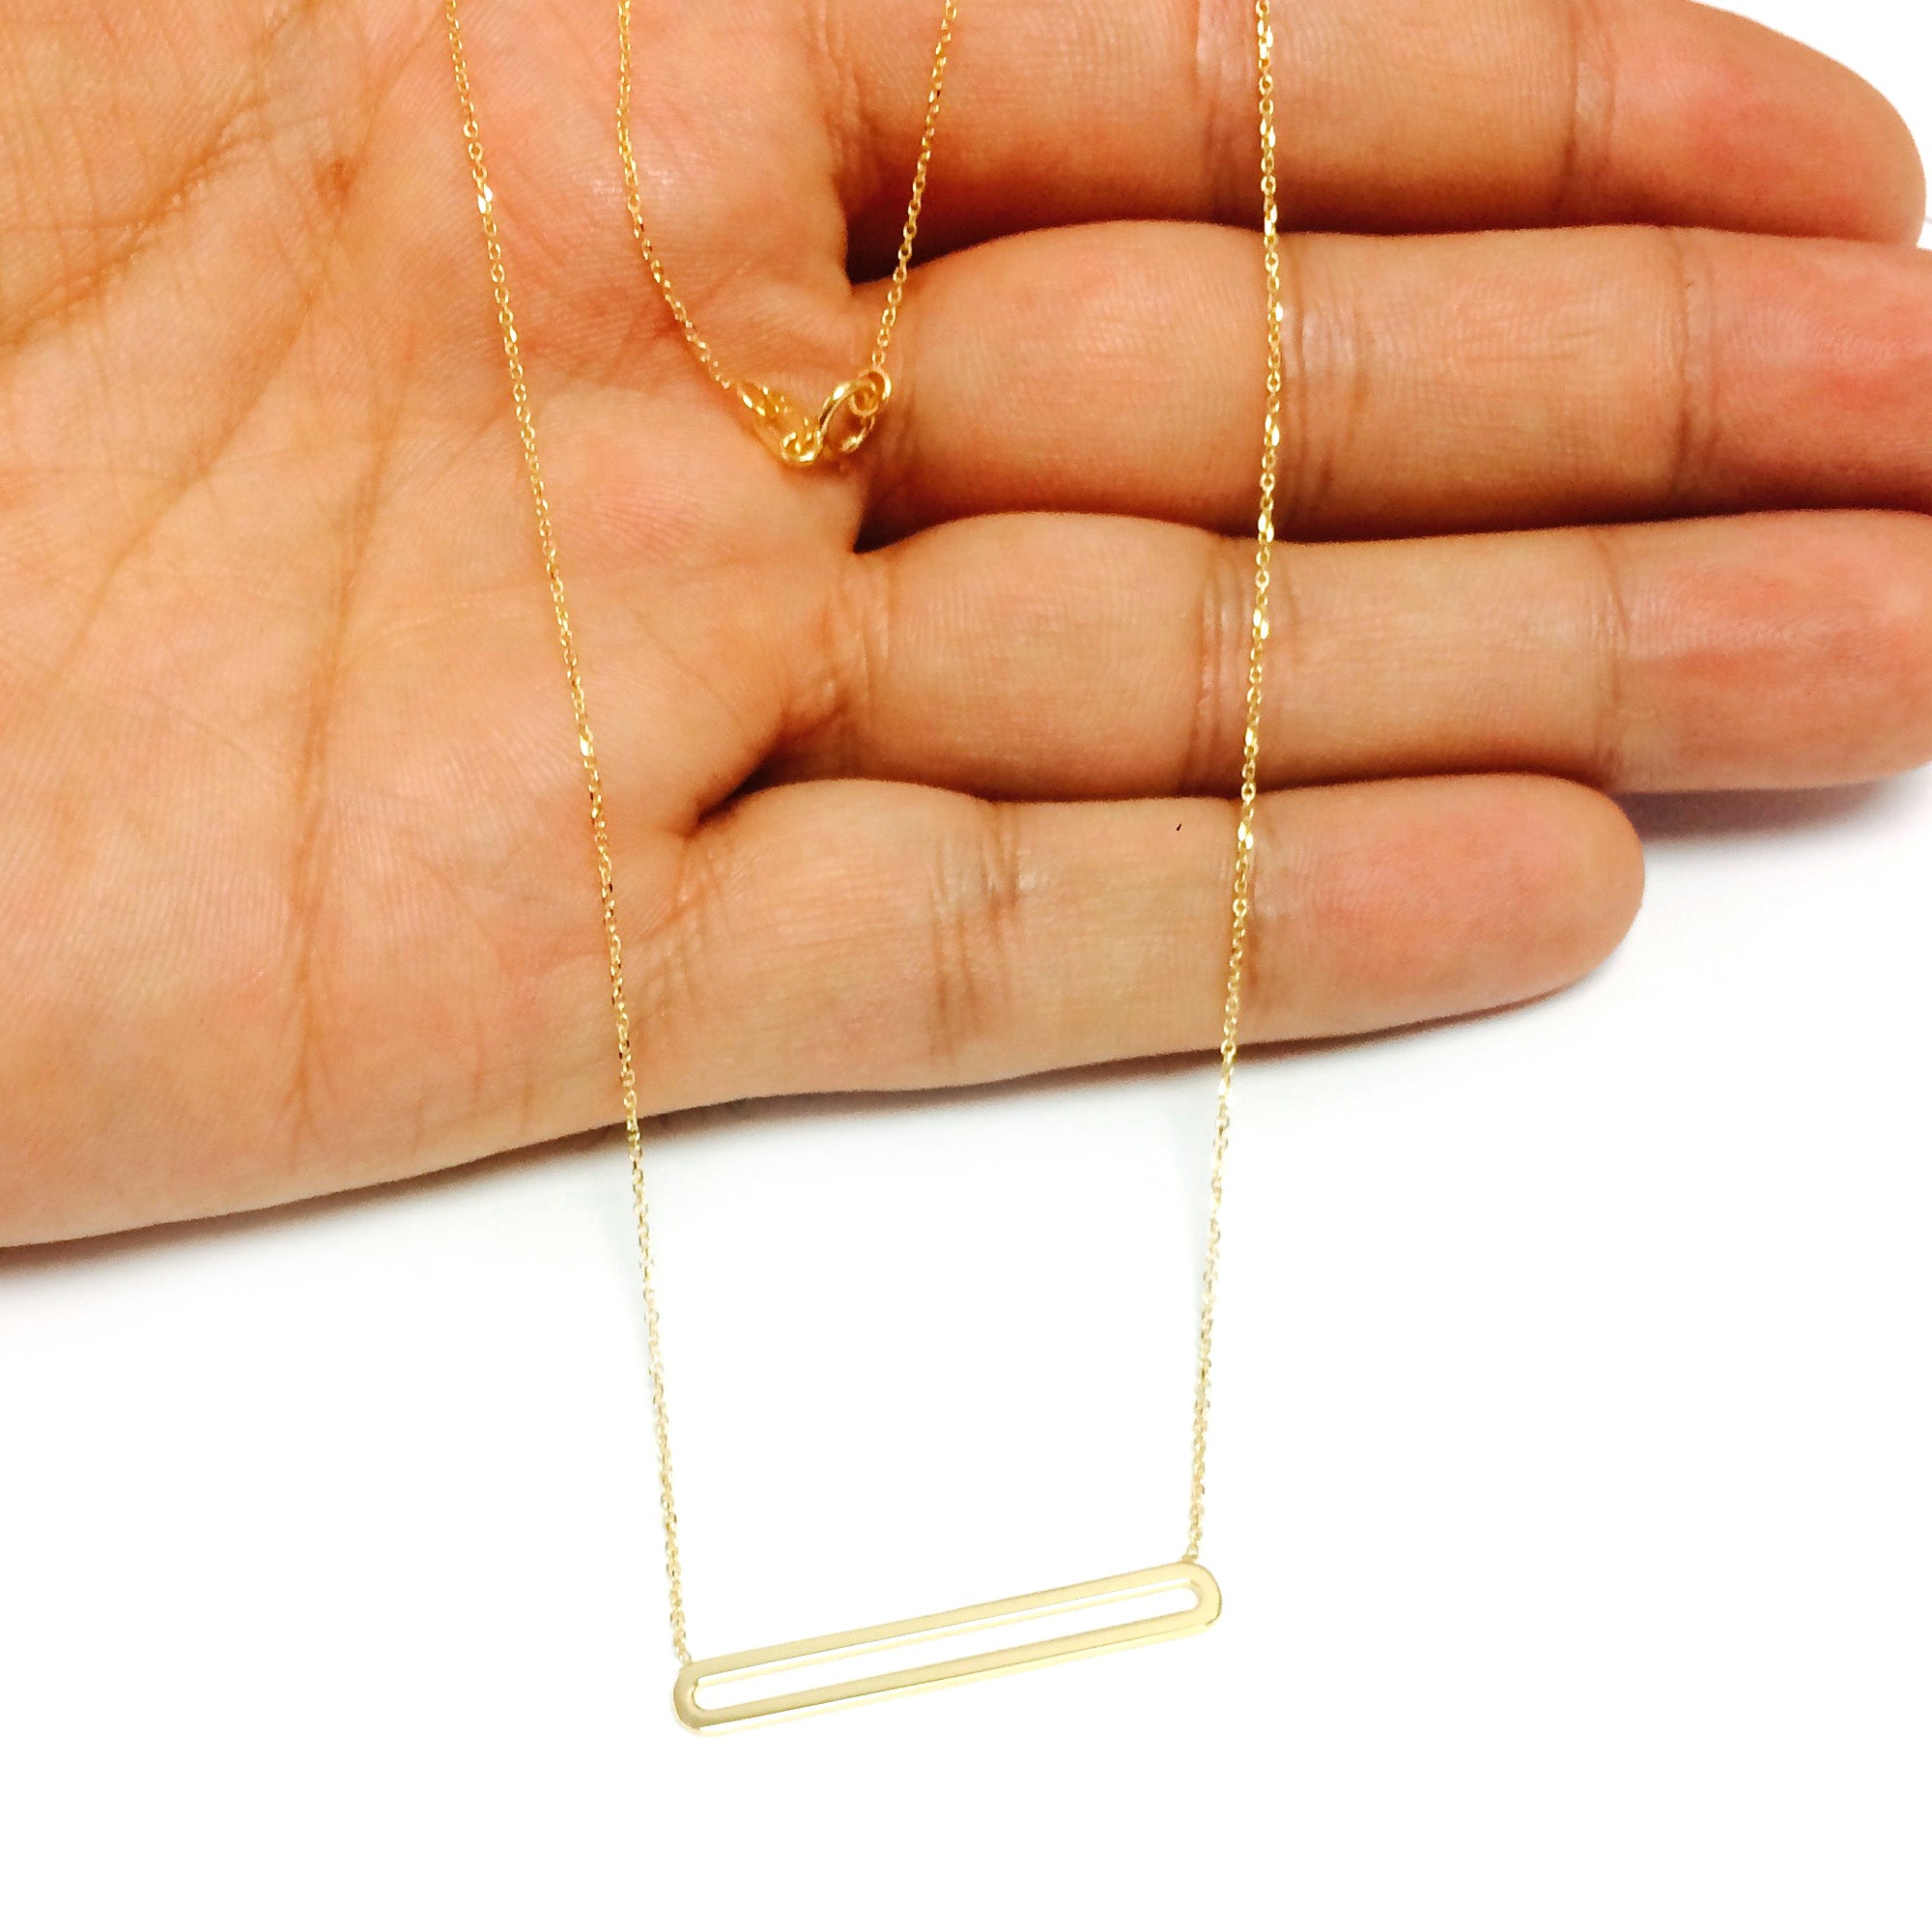 14K Yellow Gold Oval Bar Pendant Necklace, 18"